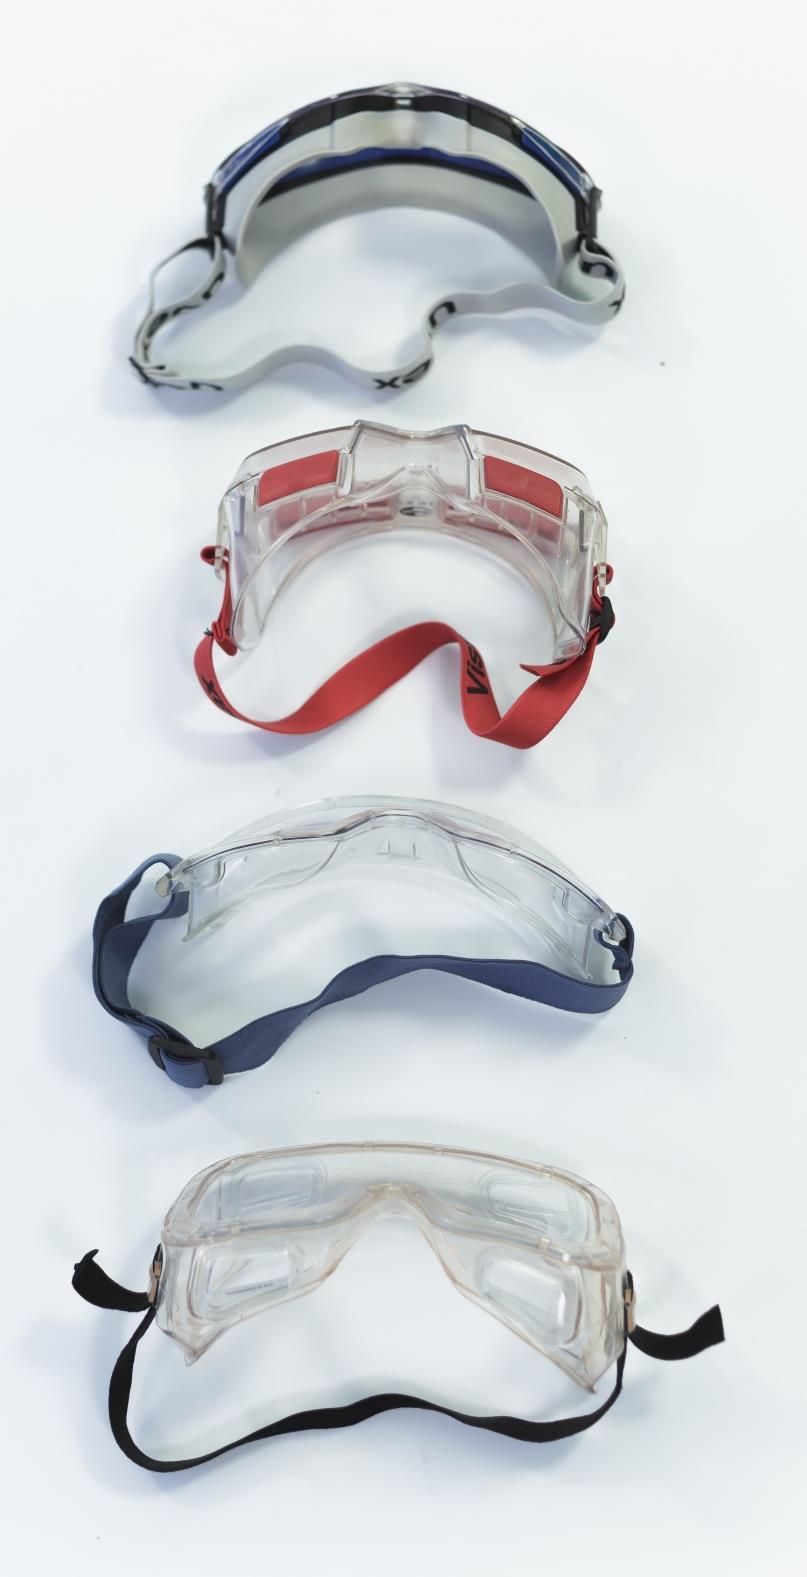 Critical aspects of the safe use of personal protective equipment TECHNICAL DOCUMENT Different types of goggles Characteristics No ventilation, good anti-fog coating, soft silicon seal